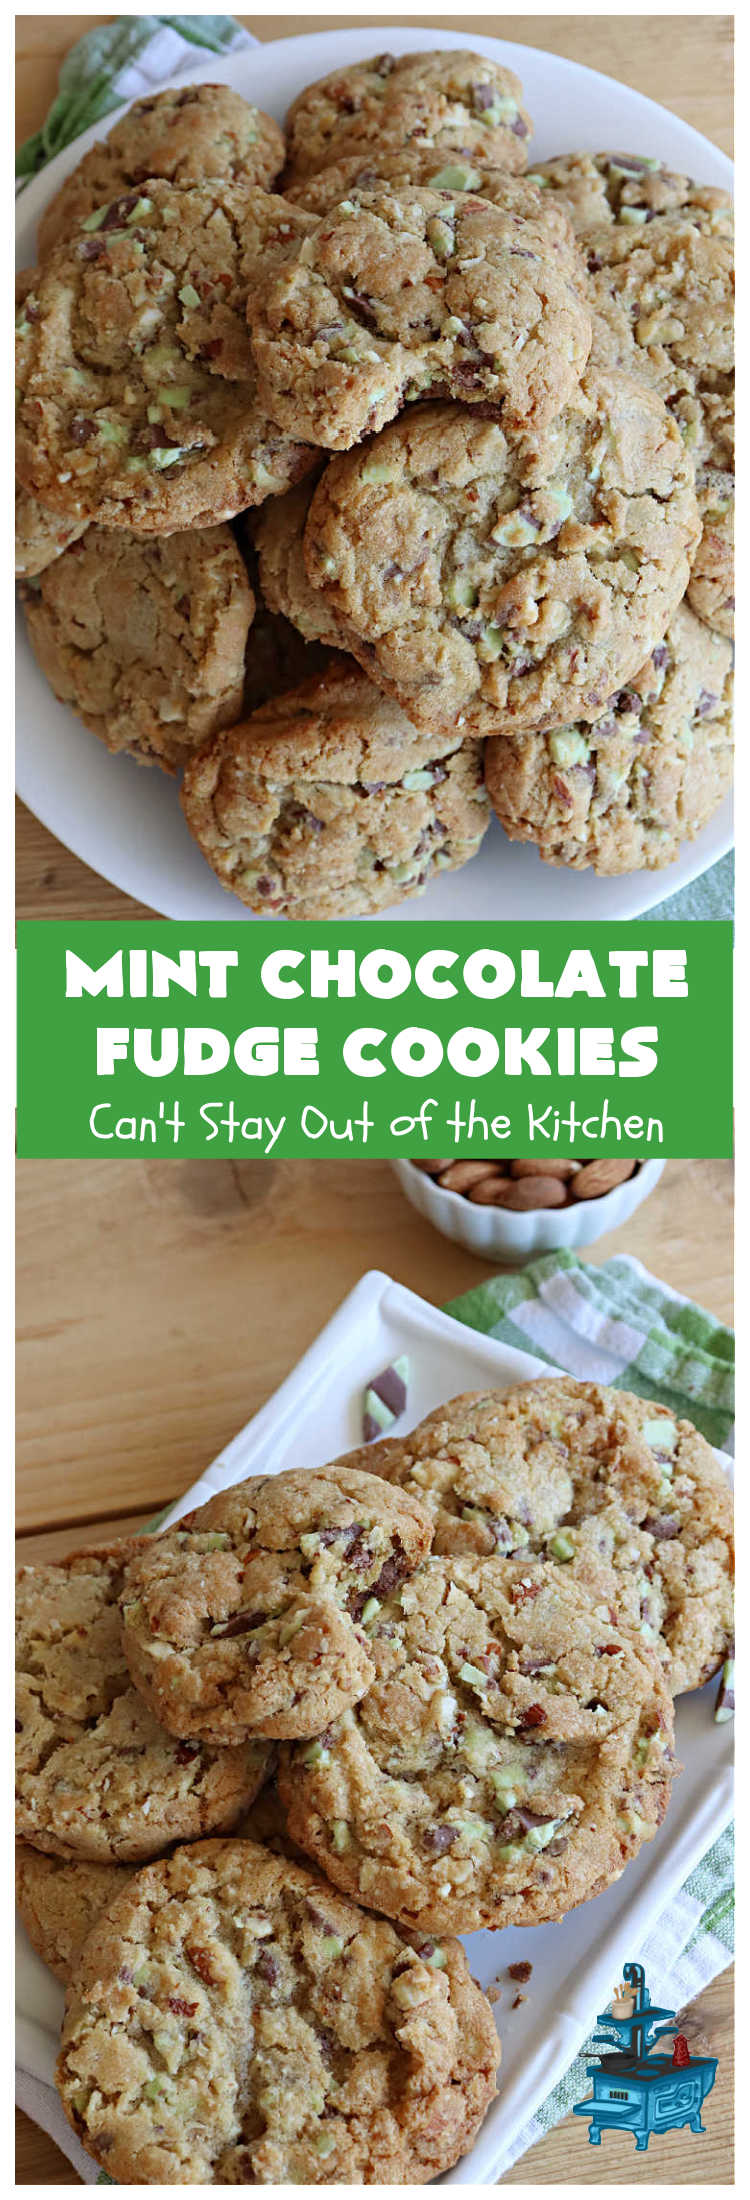 Mint Chocolate Fudge Cookies | Can't Stay Out of the Kitchen | these fantastic #cookies are nothing short of sensational. They have become one of my most requested #cookie #recipes. They have the perfect blend of flavors with #mint, #chocolate, #fudge & #almonds. Every bite will have you swooning. They're so good it's hard to stop at just one! #tailgating #holiday #HolidayBaking #ChocolateDessert #ChocolateChipCookie #dessert #MintChocolateFudgeCookies #ChristmasCookieExchange